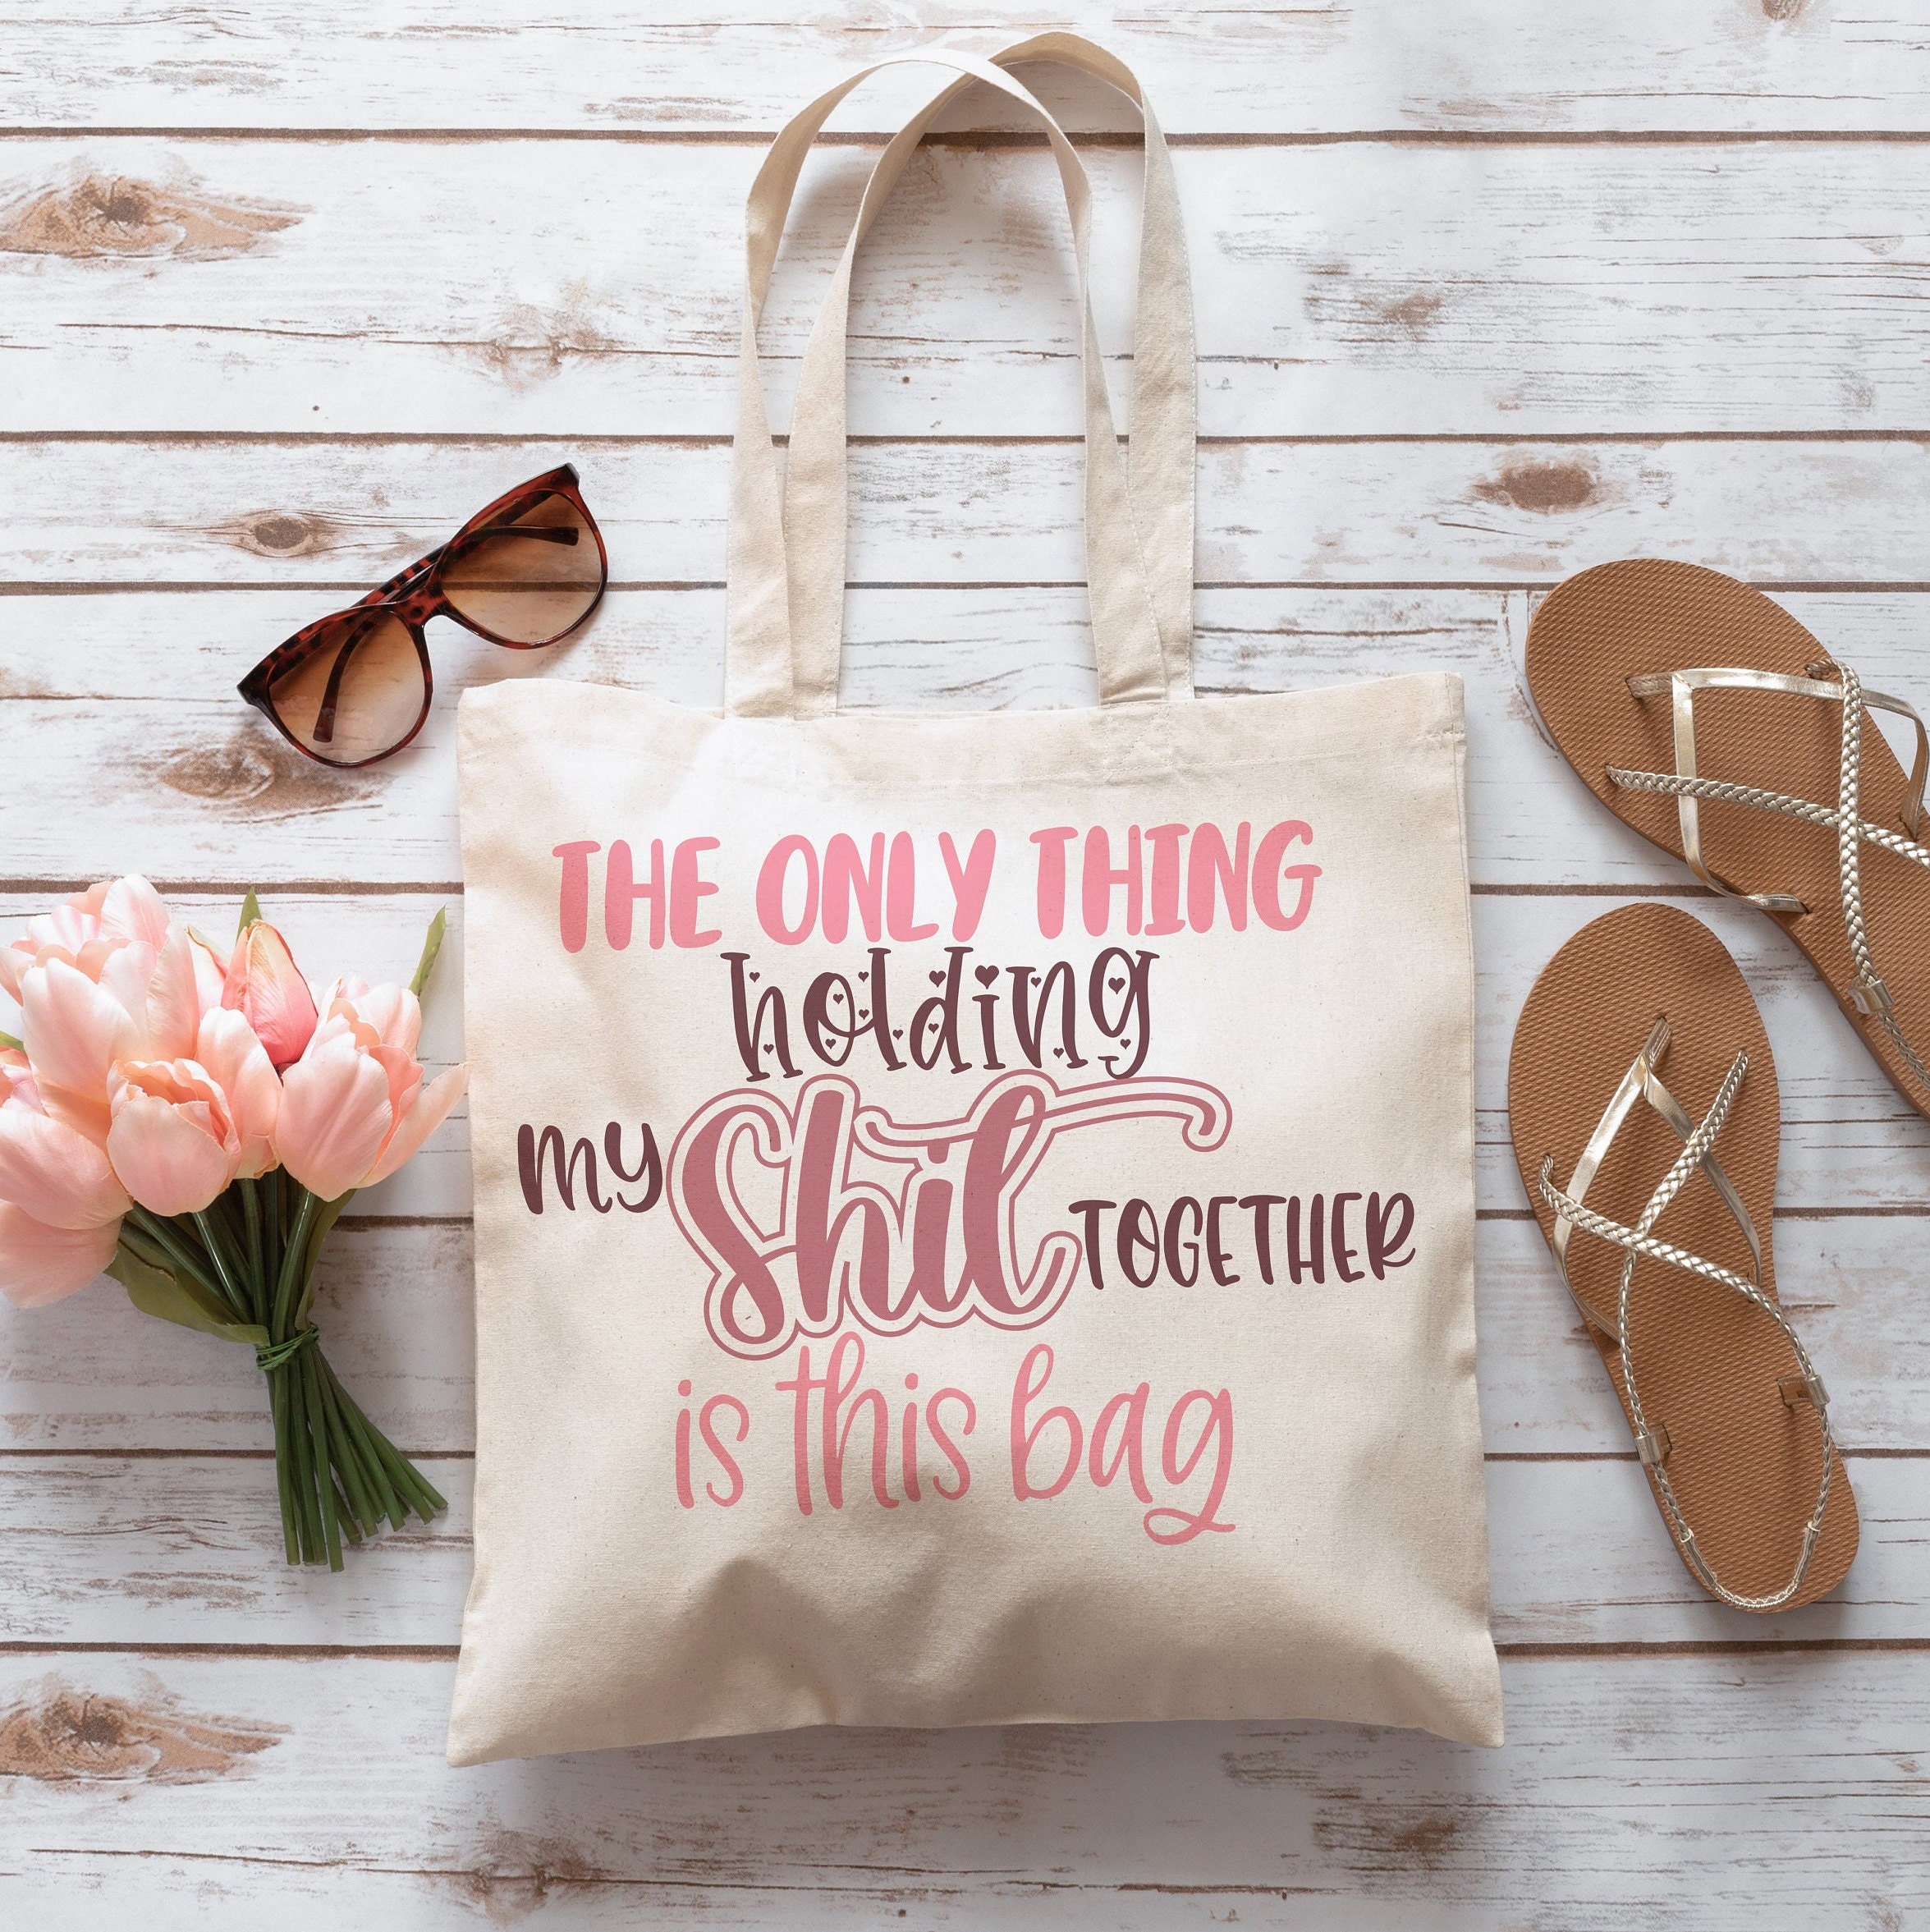 Obsessed with Scrapbooking: Finally found a bag to hold the Cricut